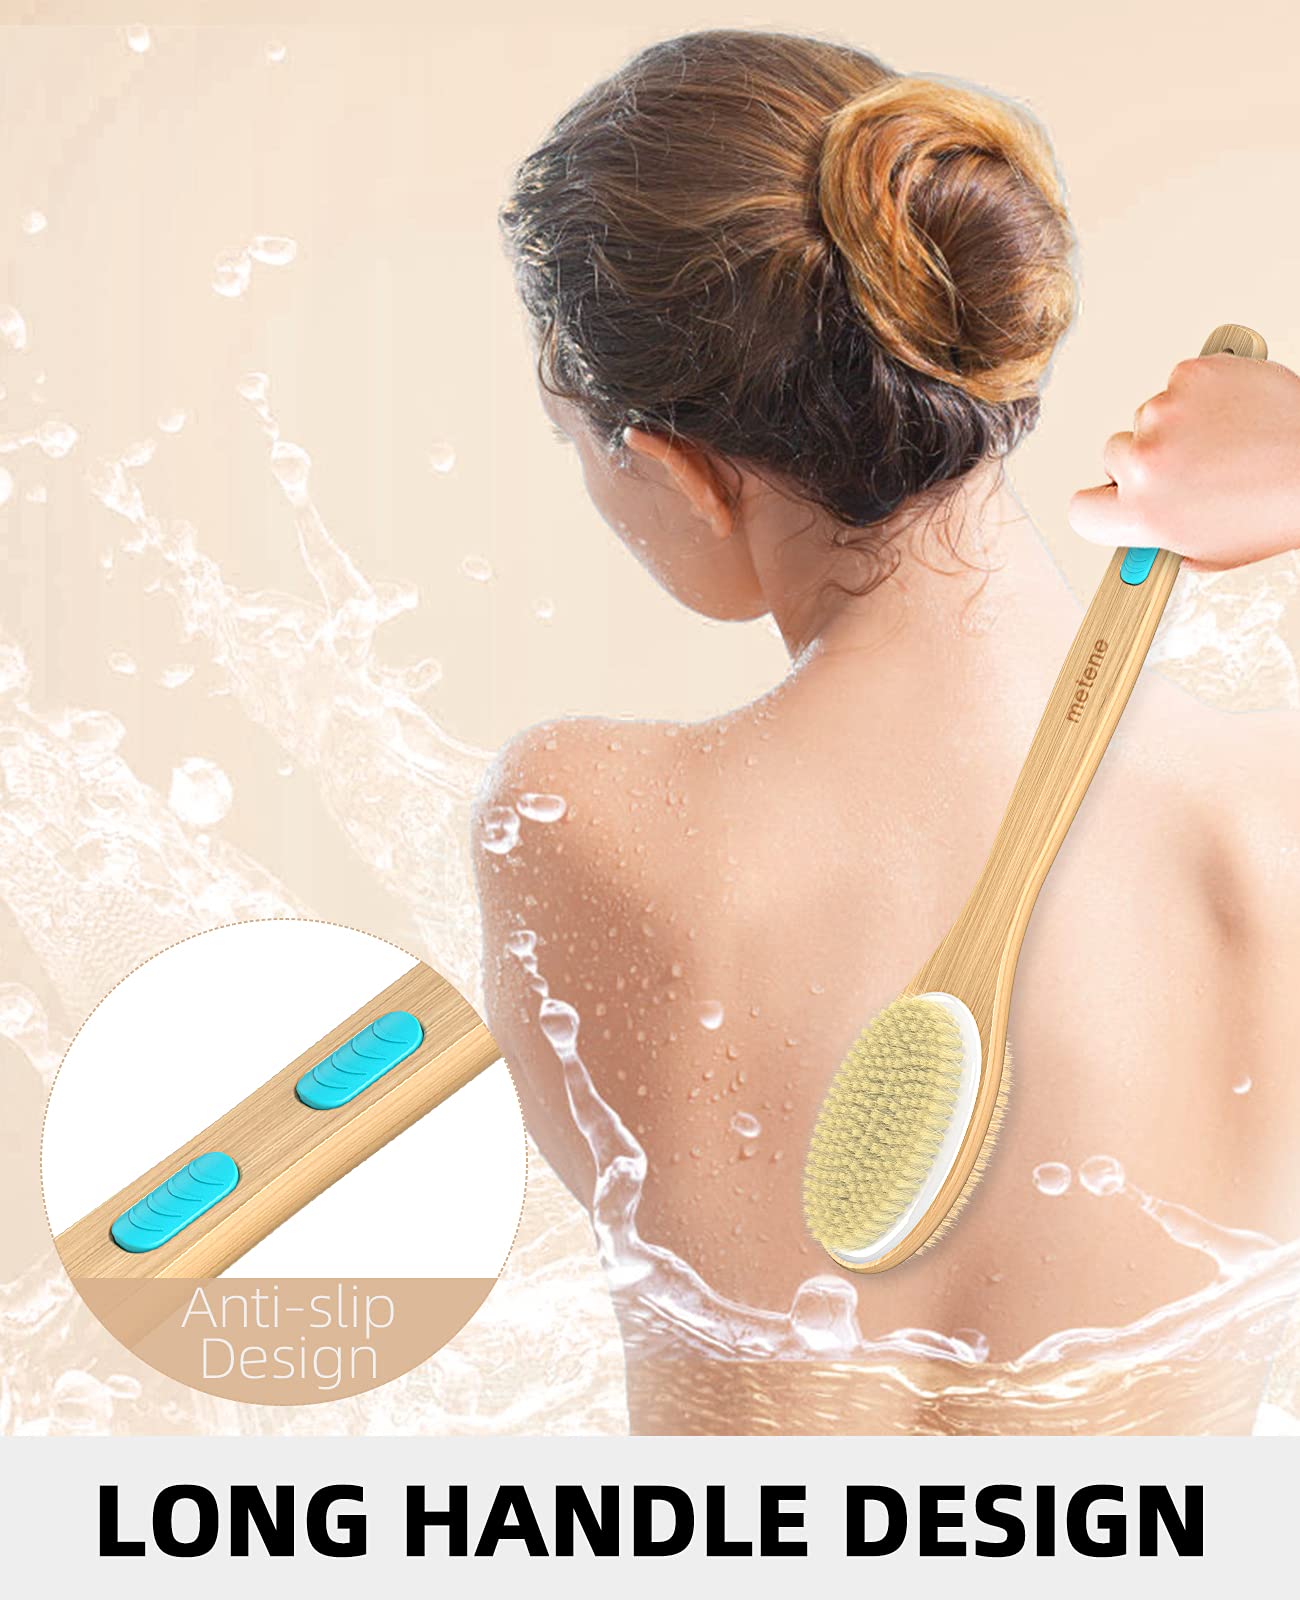 Metene Shower Brush with Soft and Stiff Bristles, Bath Dual-Sided Long Handle Back Scrubber Body Exfoliator for Wet or Dry Brush